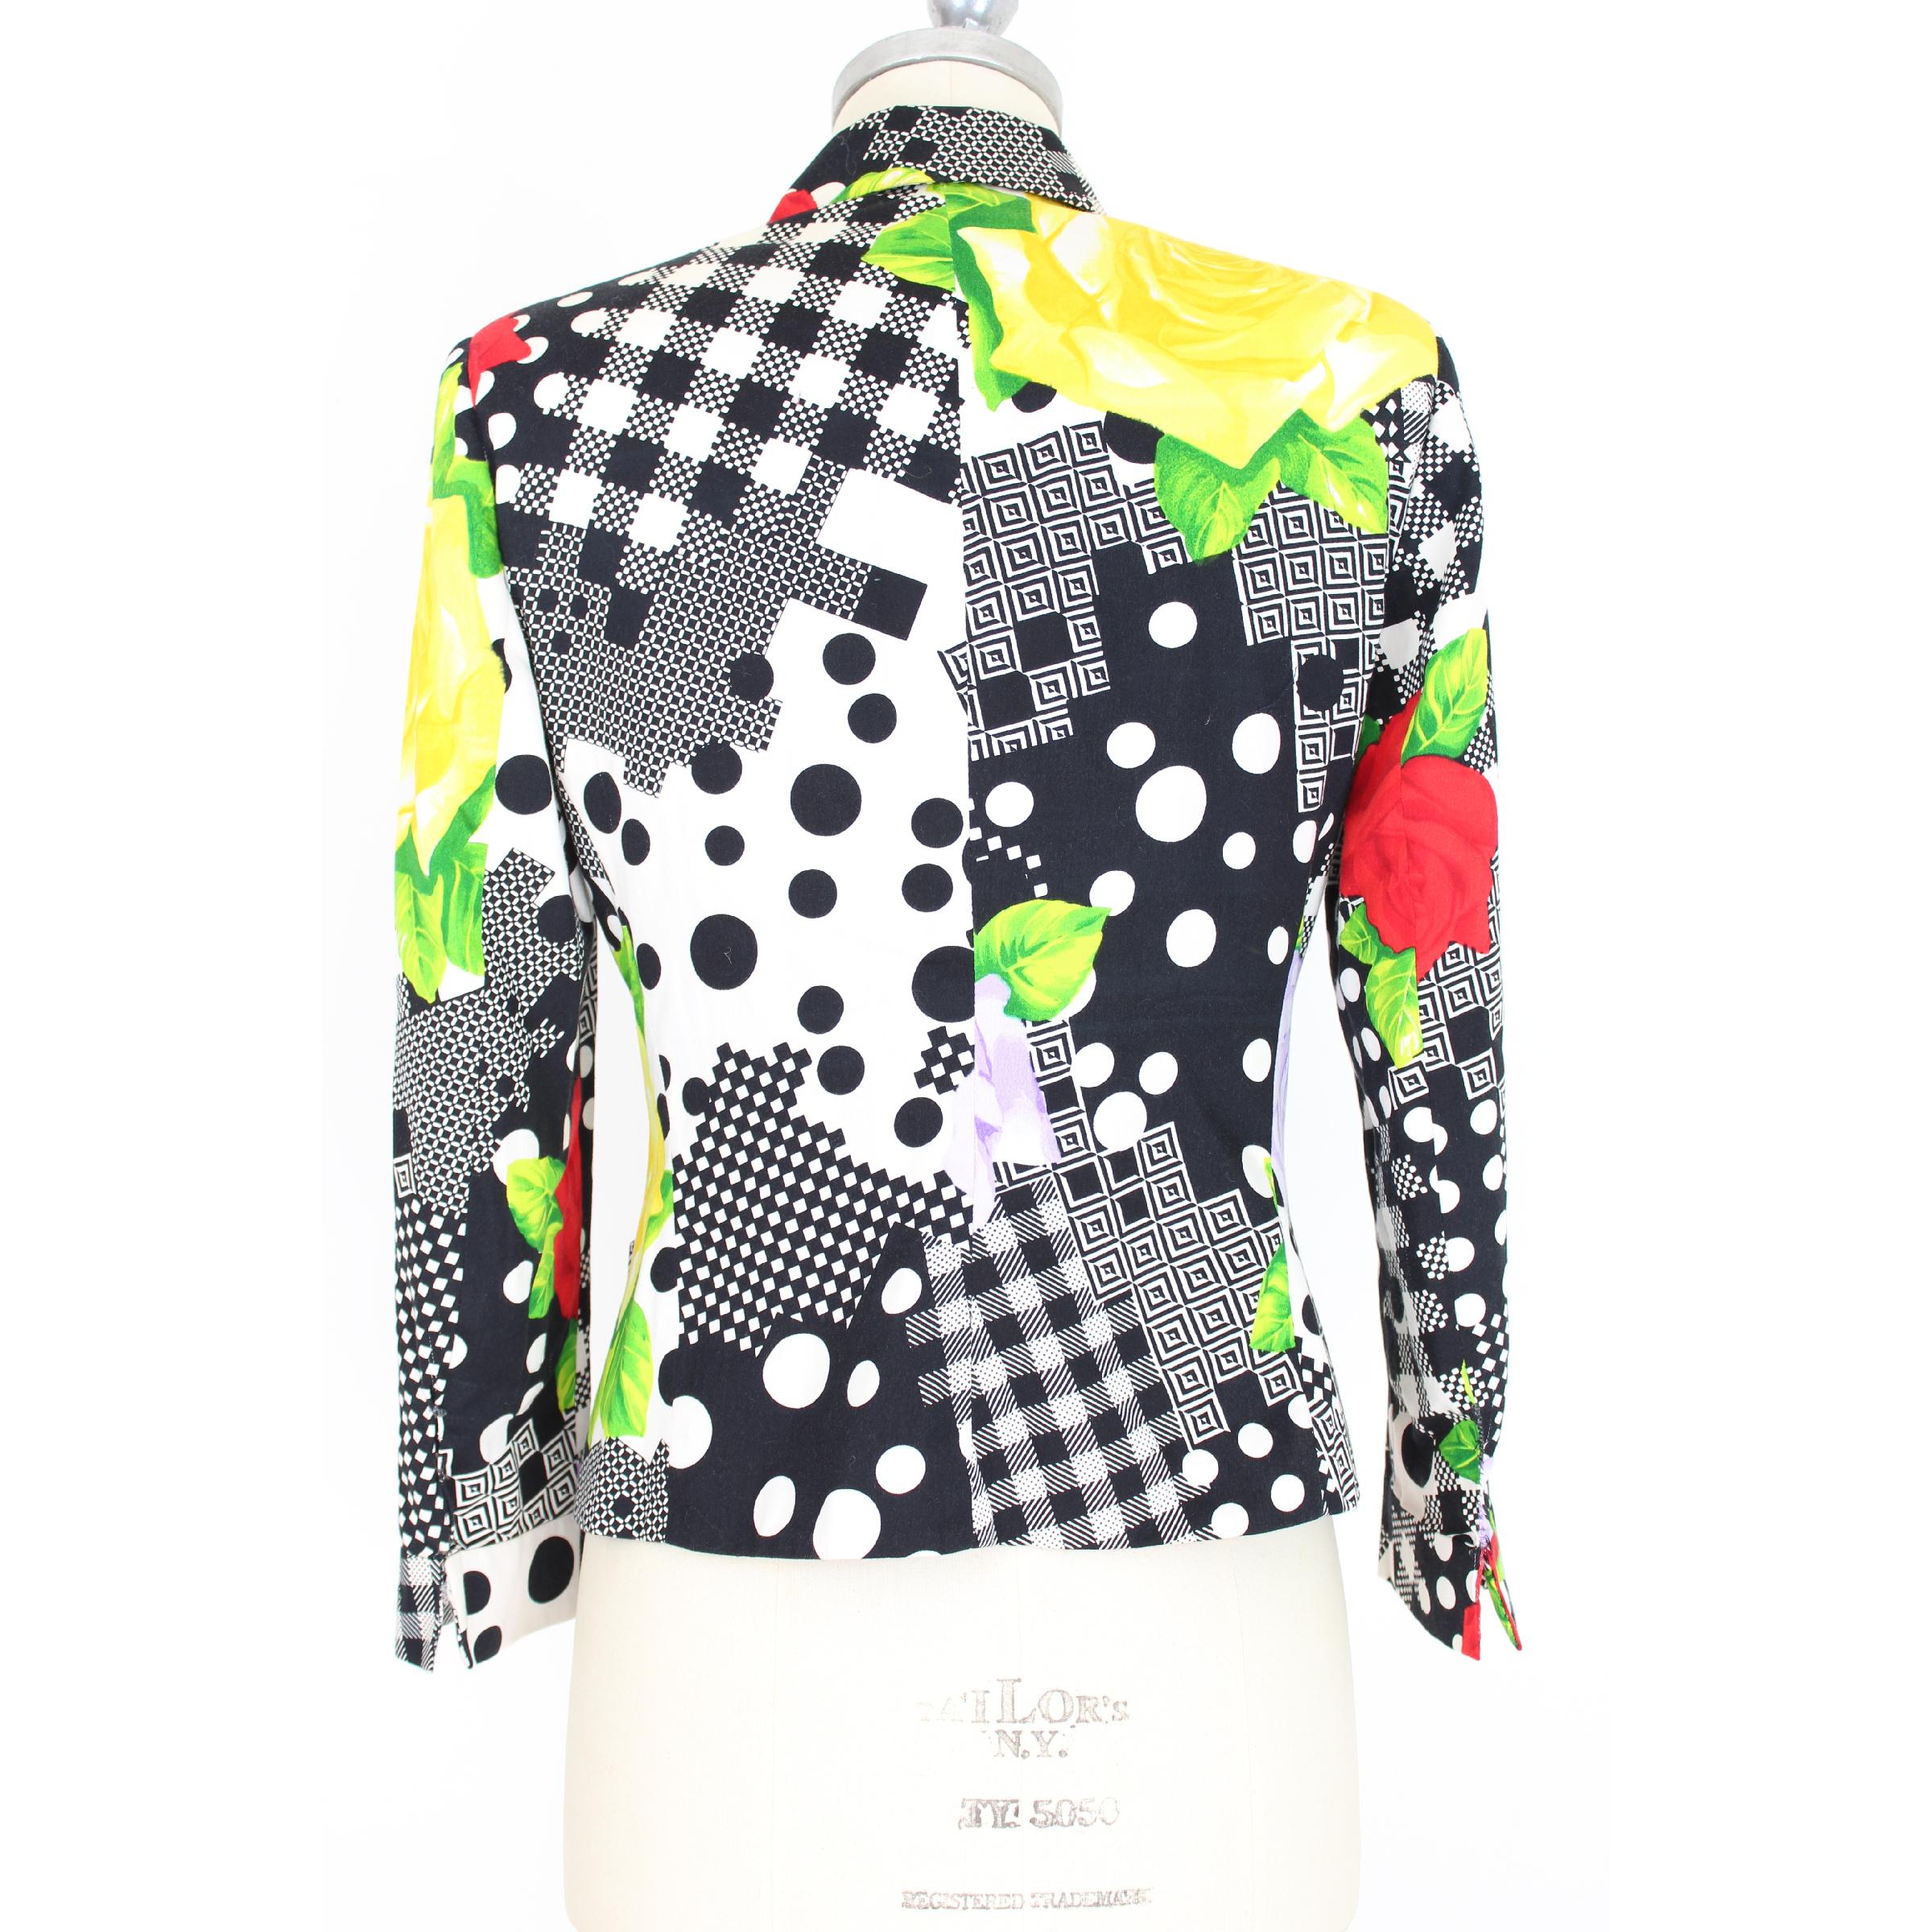 Vintage women's jacket Versus by Gianni Versace, double-breasted model with golden buttons, multicolored geometric and floral designs, 100% cotton, 1990s. Made in Italy. Excellent vintage conditions.

Size: 42 It 8 Us 10 Uk

Shoulder: 42 cm
Bust /